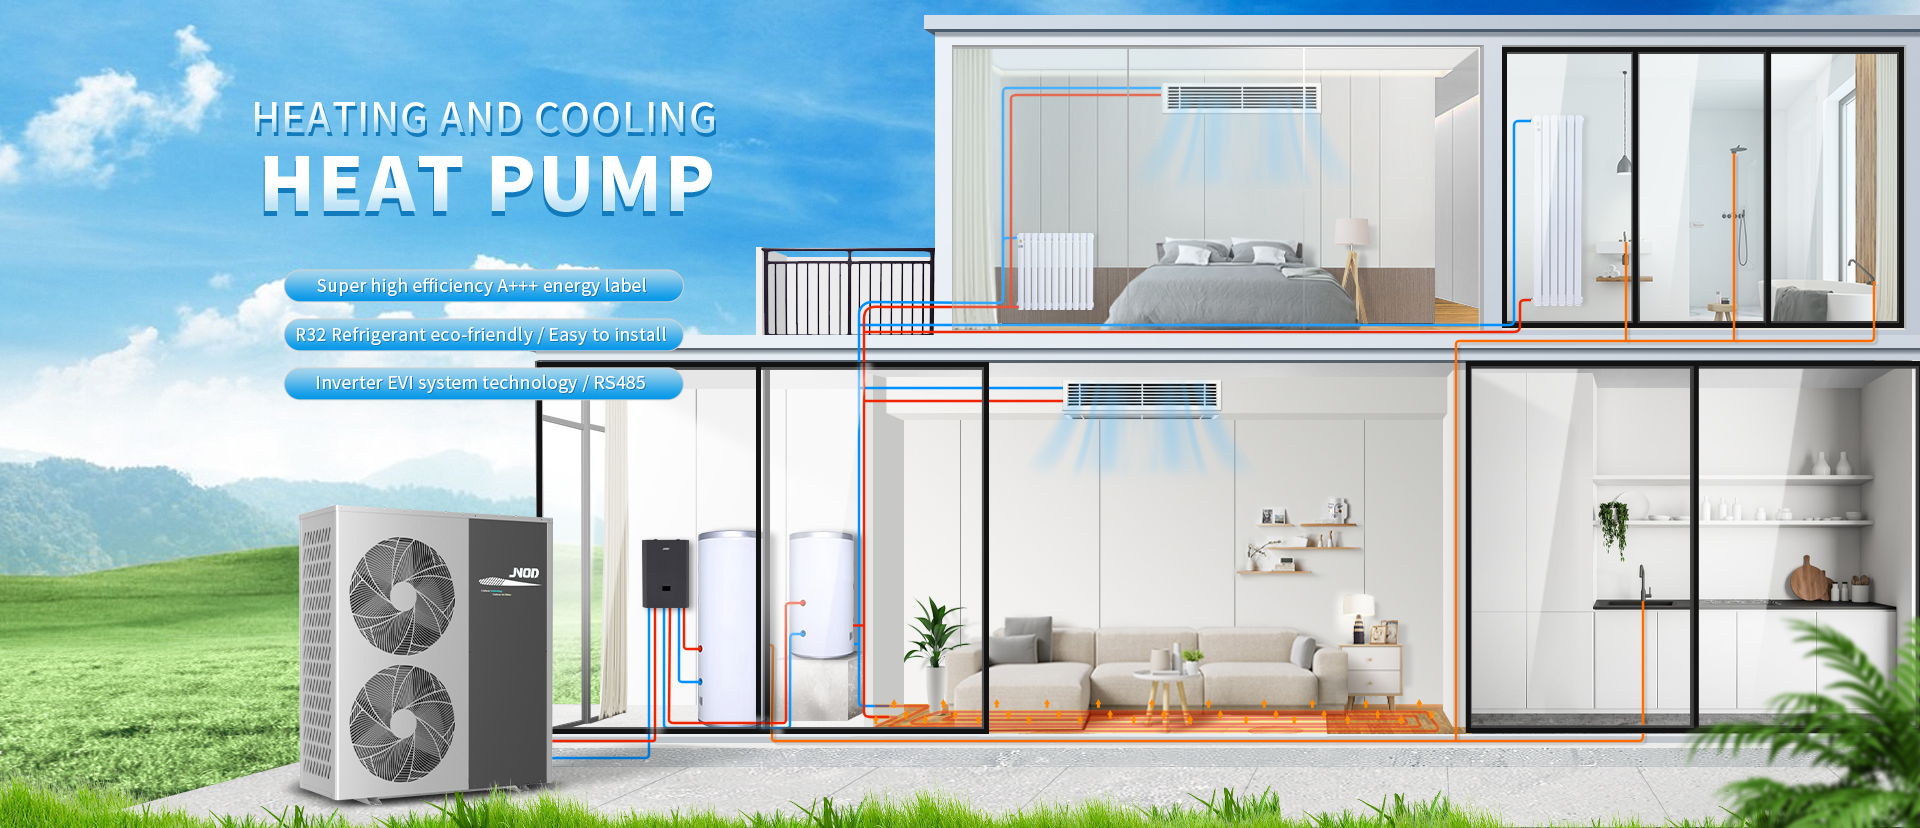 Heating And Cooling Heat Pump make money